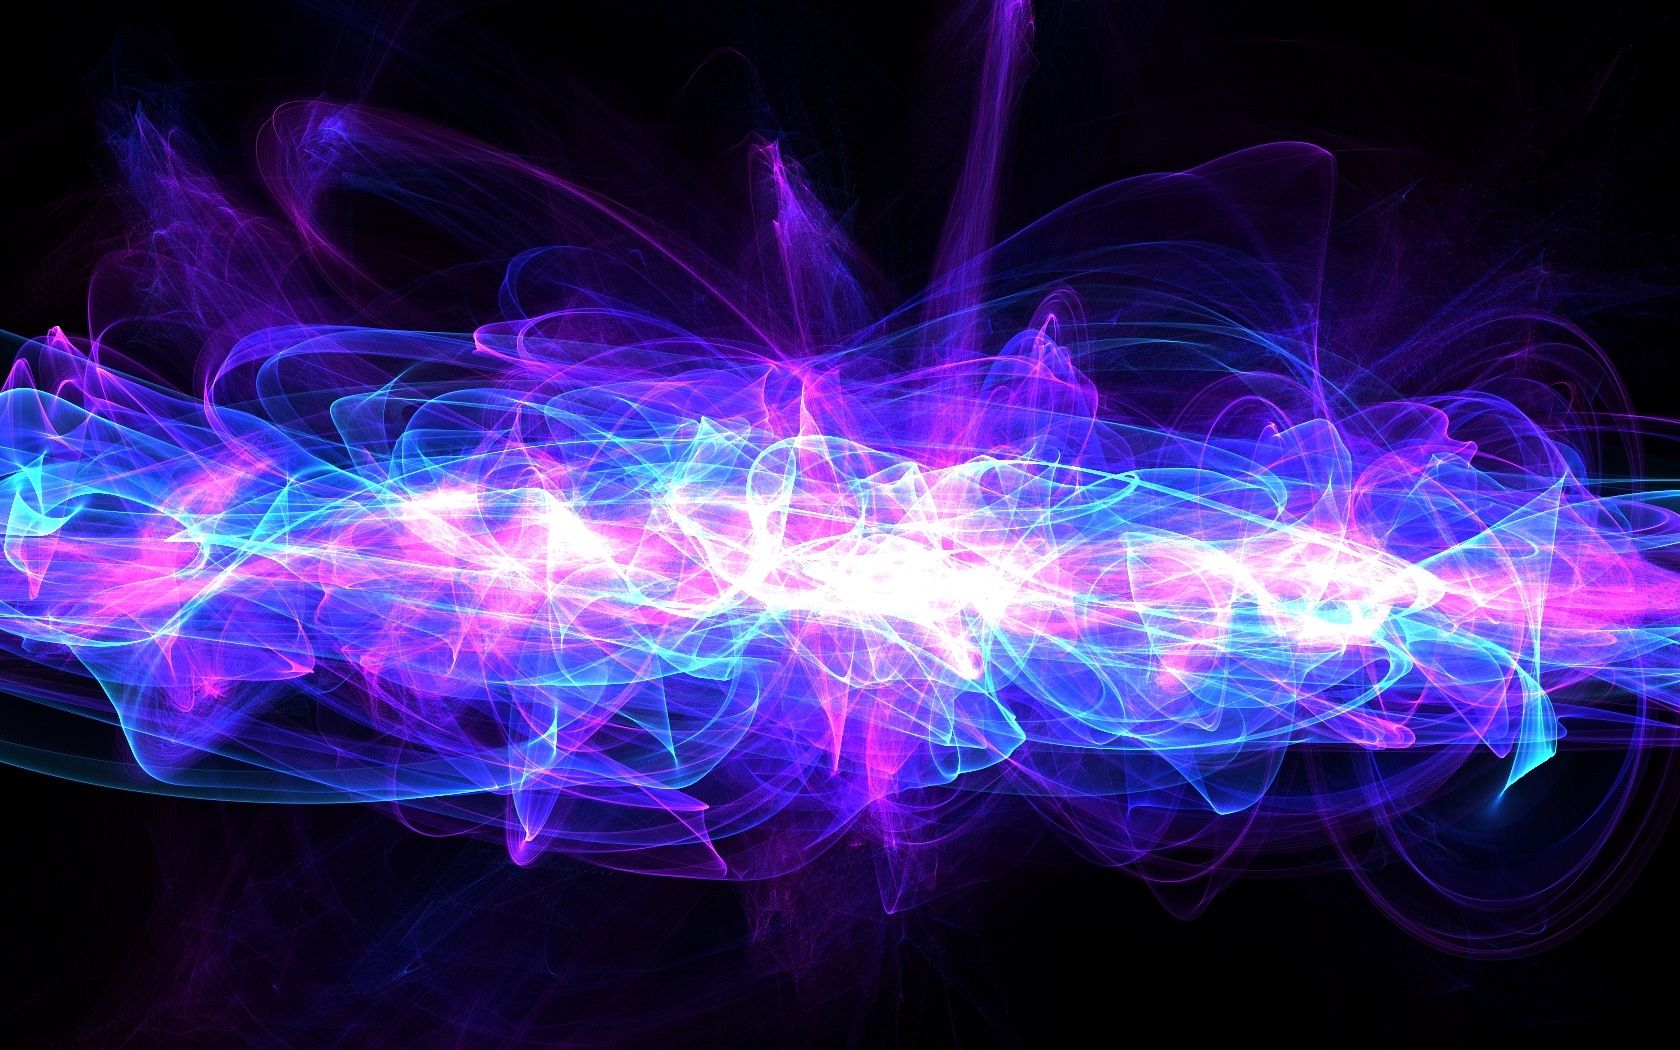 66 Amazing 3D - Abstract HD Wallpapers Up to 5K [Set 2]